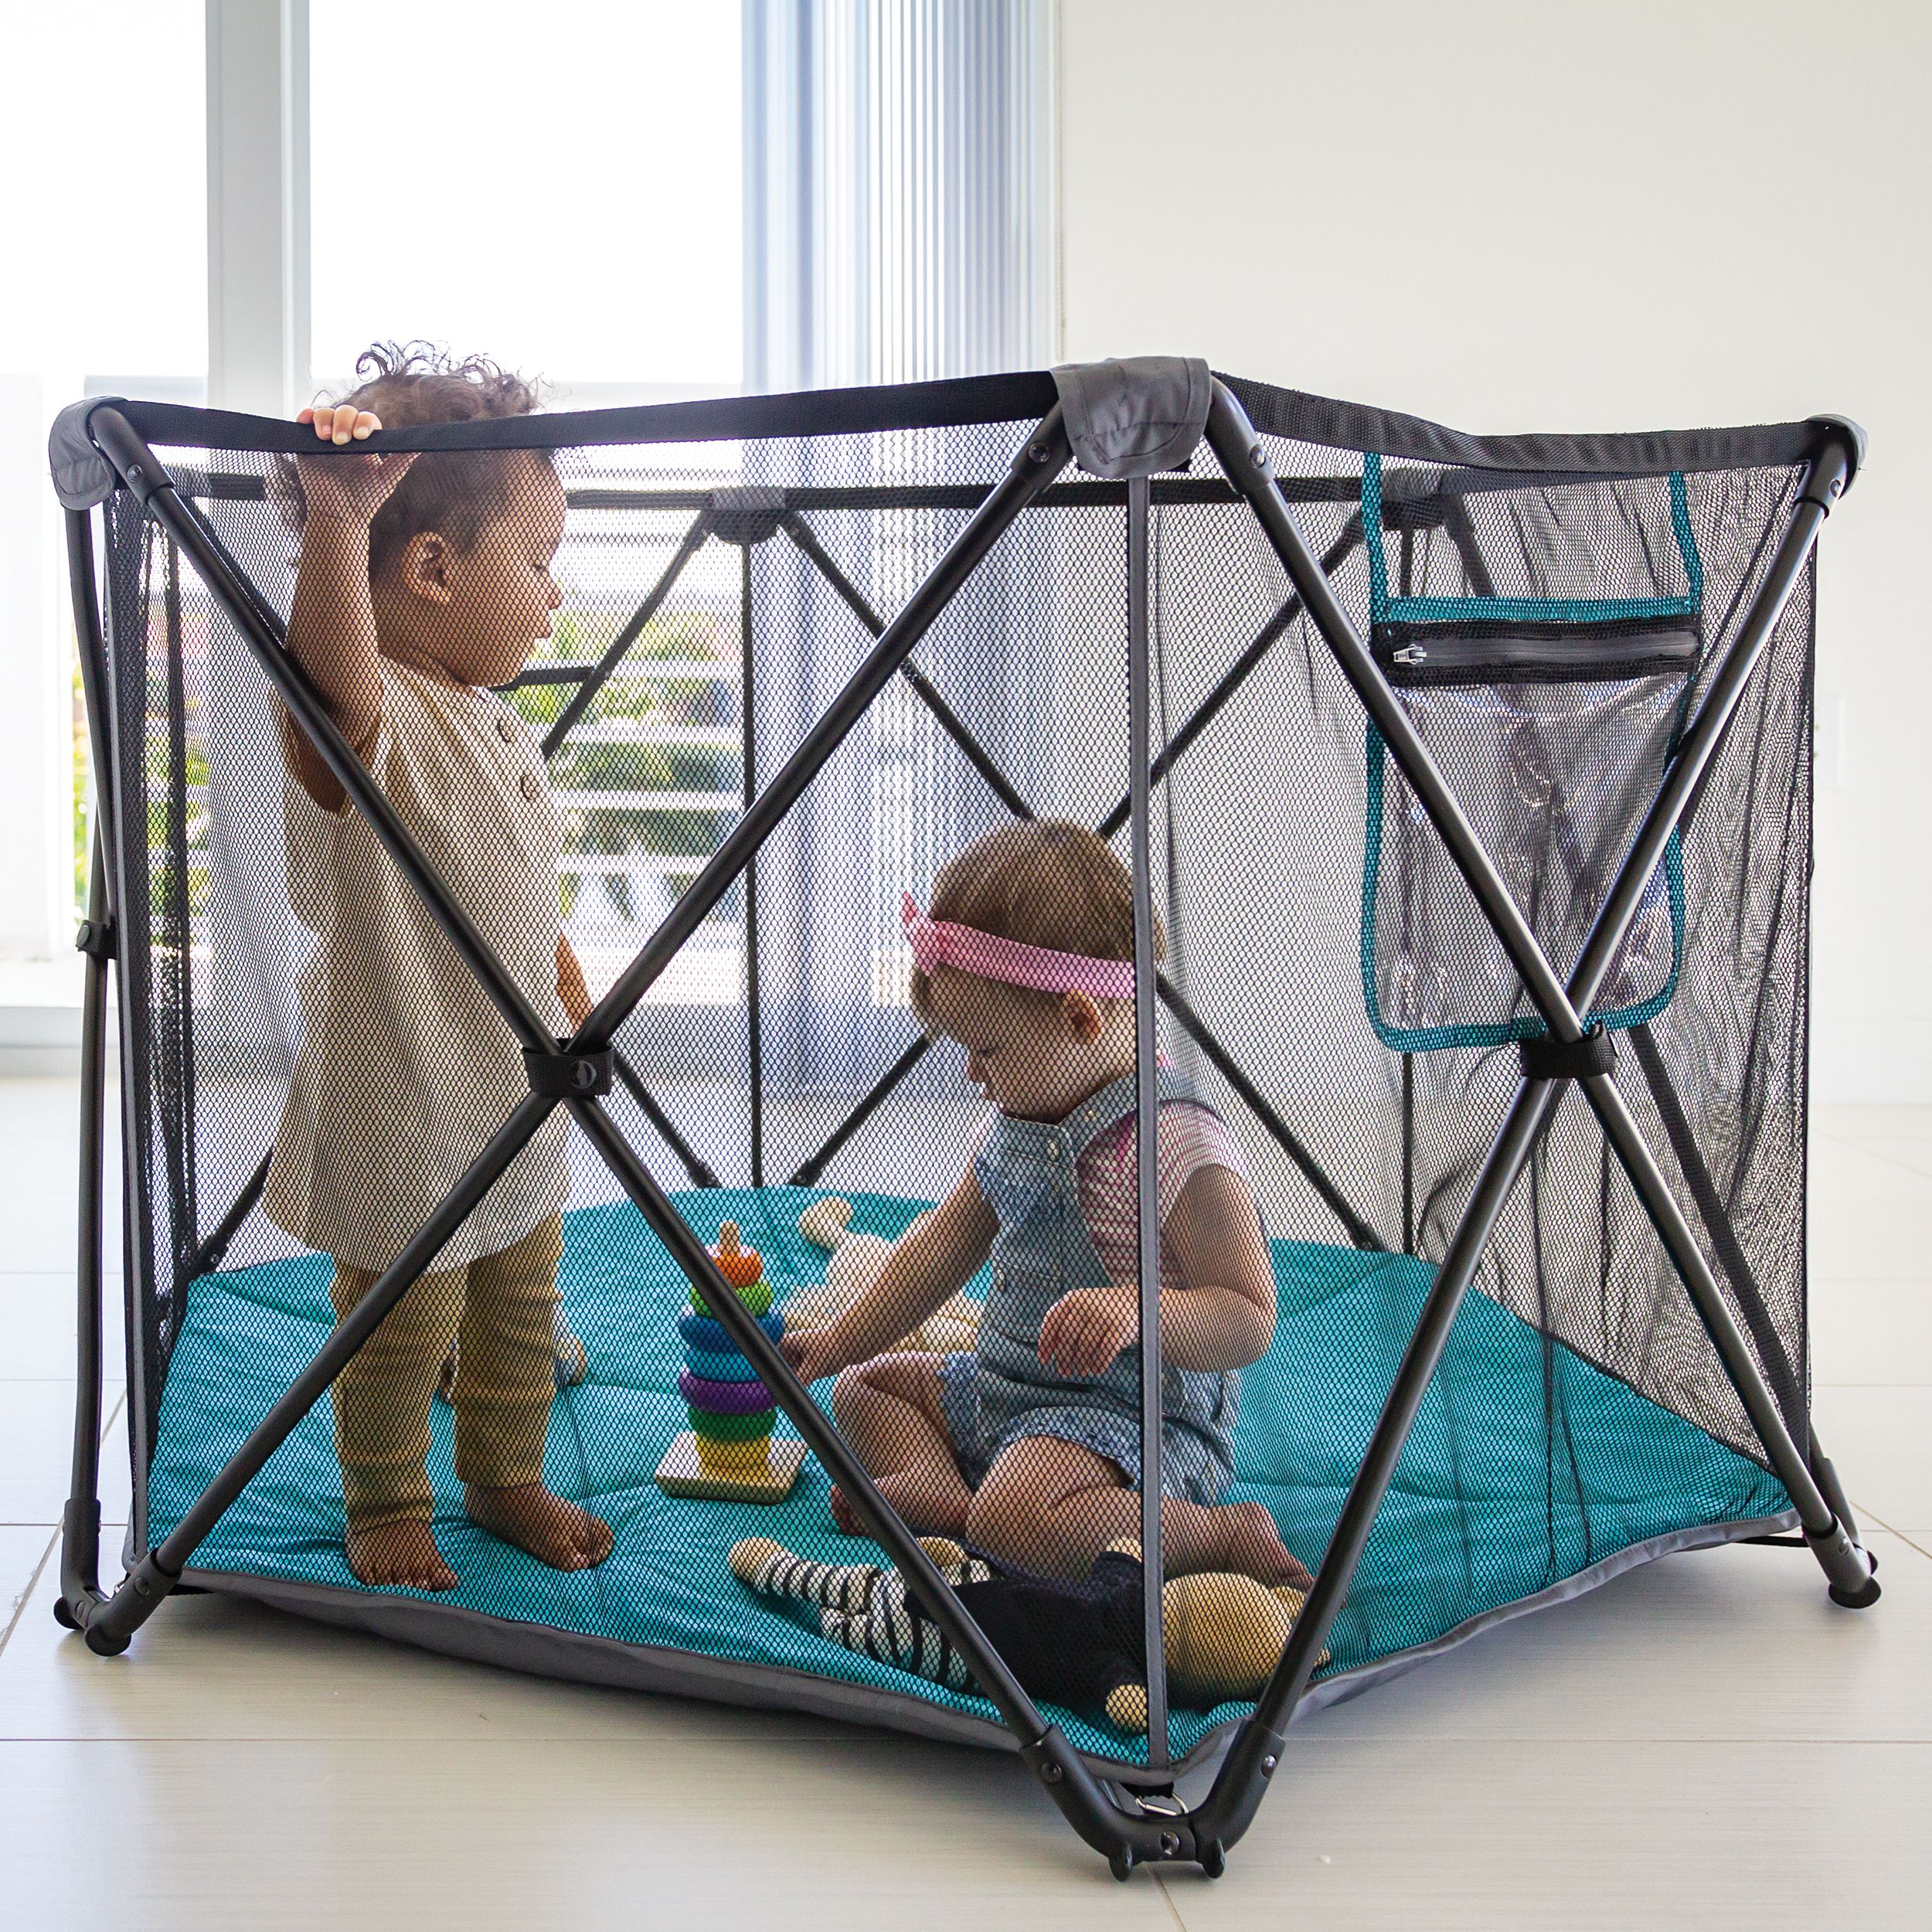 Evenflo Play Away Indoor and Outdoor Portable Playard with Canopy, Cedar Grove - image 4 of 15